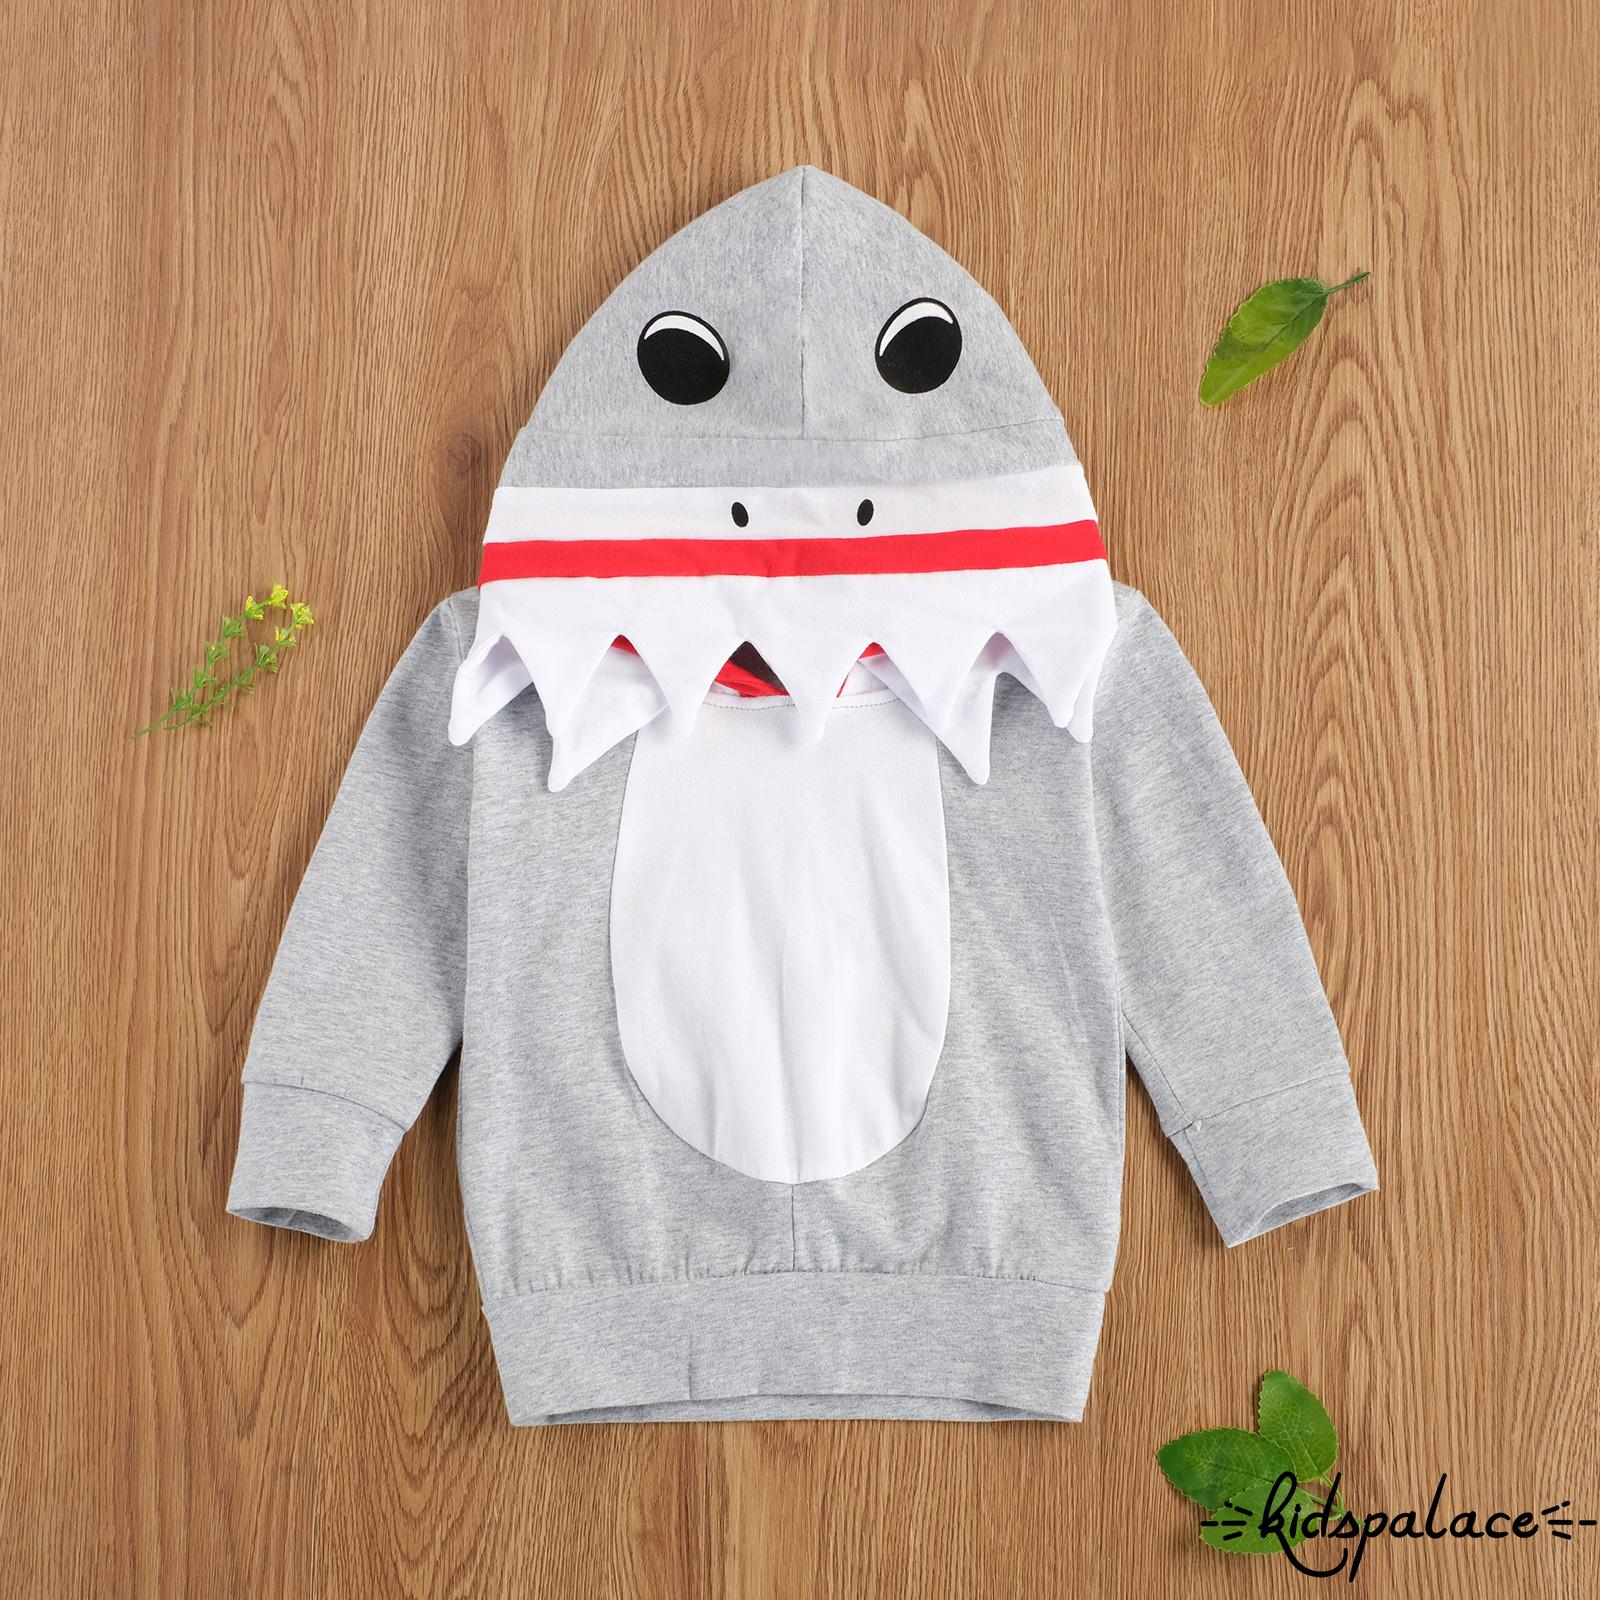 BbQ-Kid´s Sweater, Long Sleeve Cute Cartoon Hooded Top for Vacation Birthday Party Photography